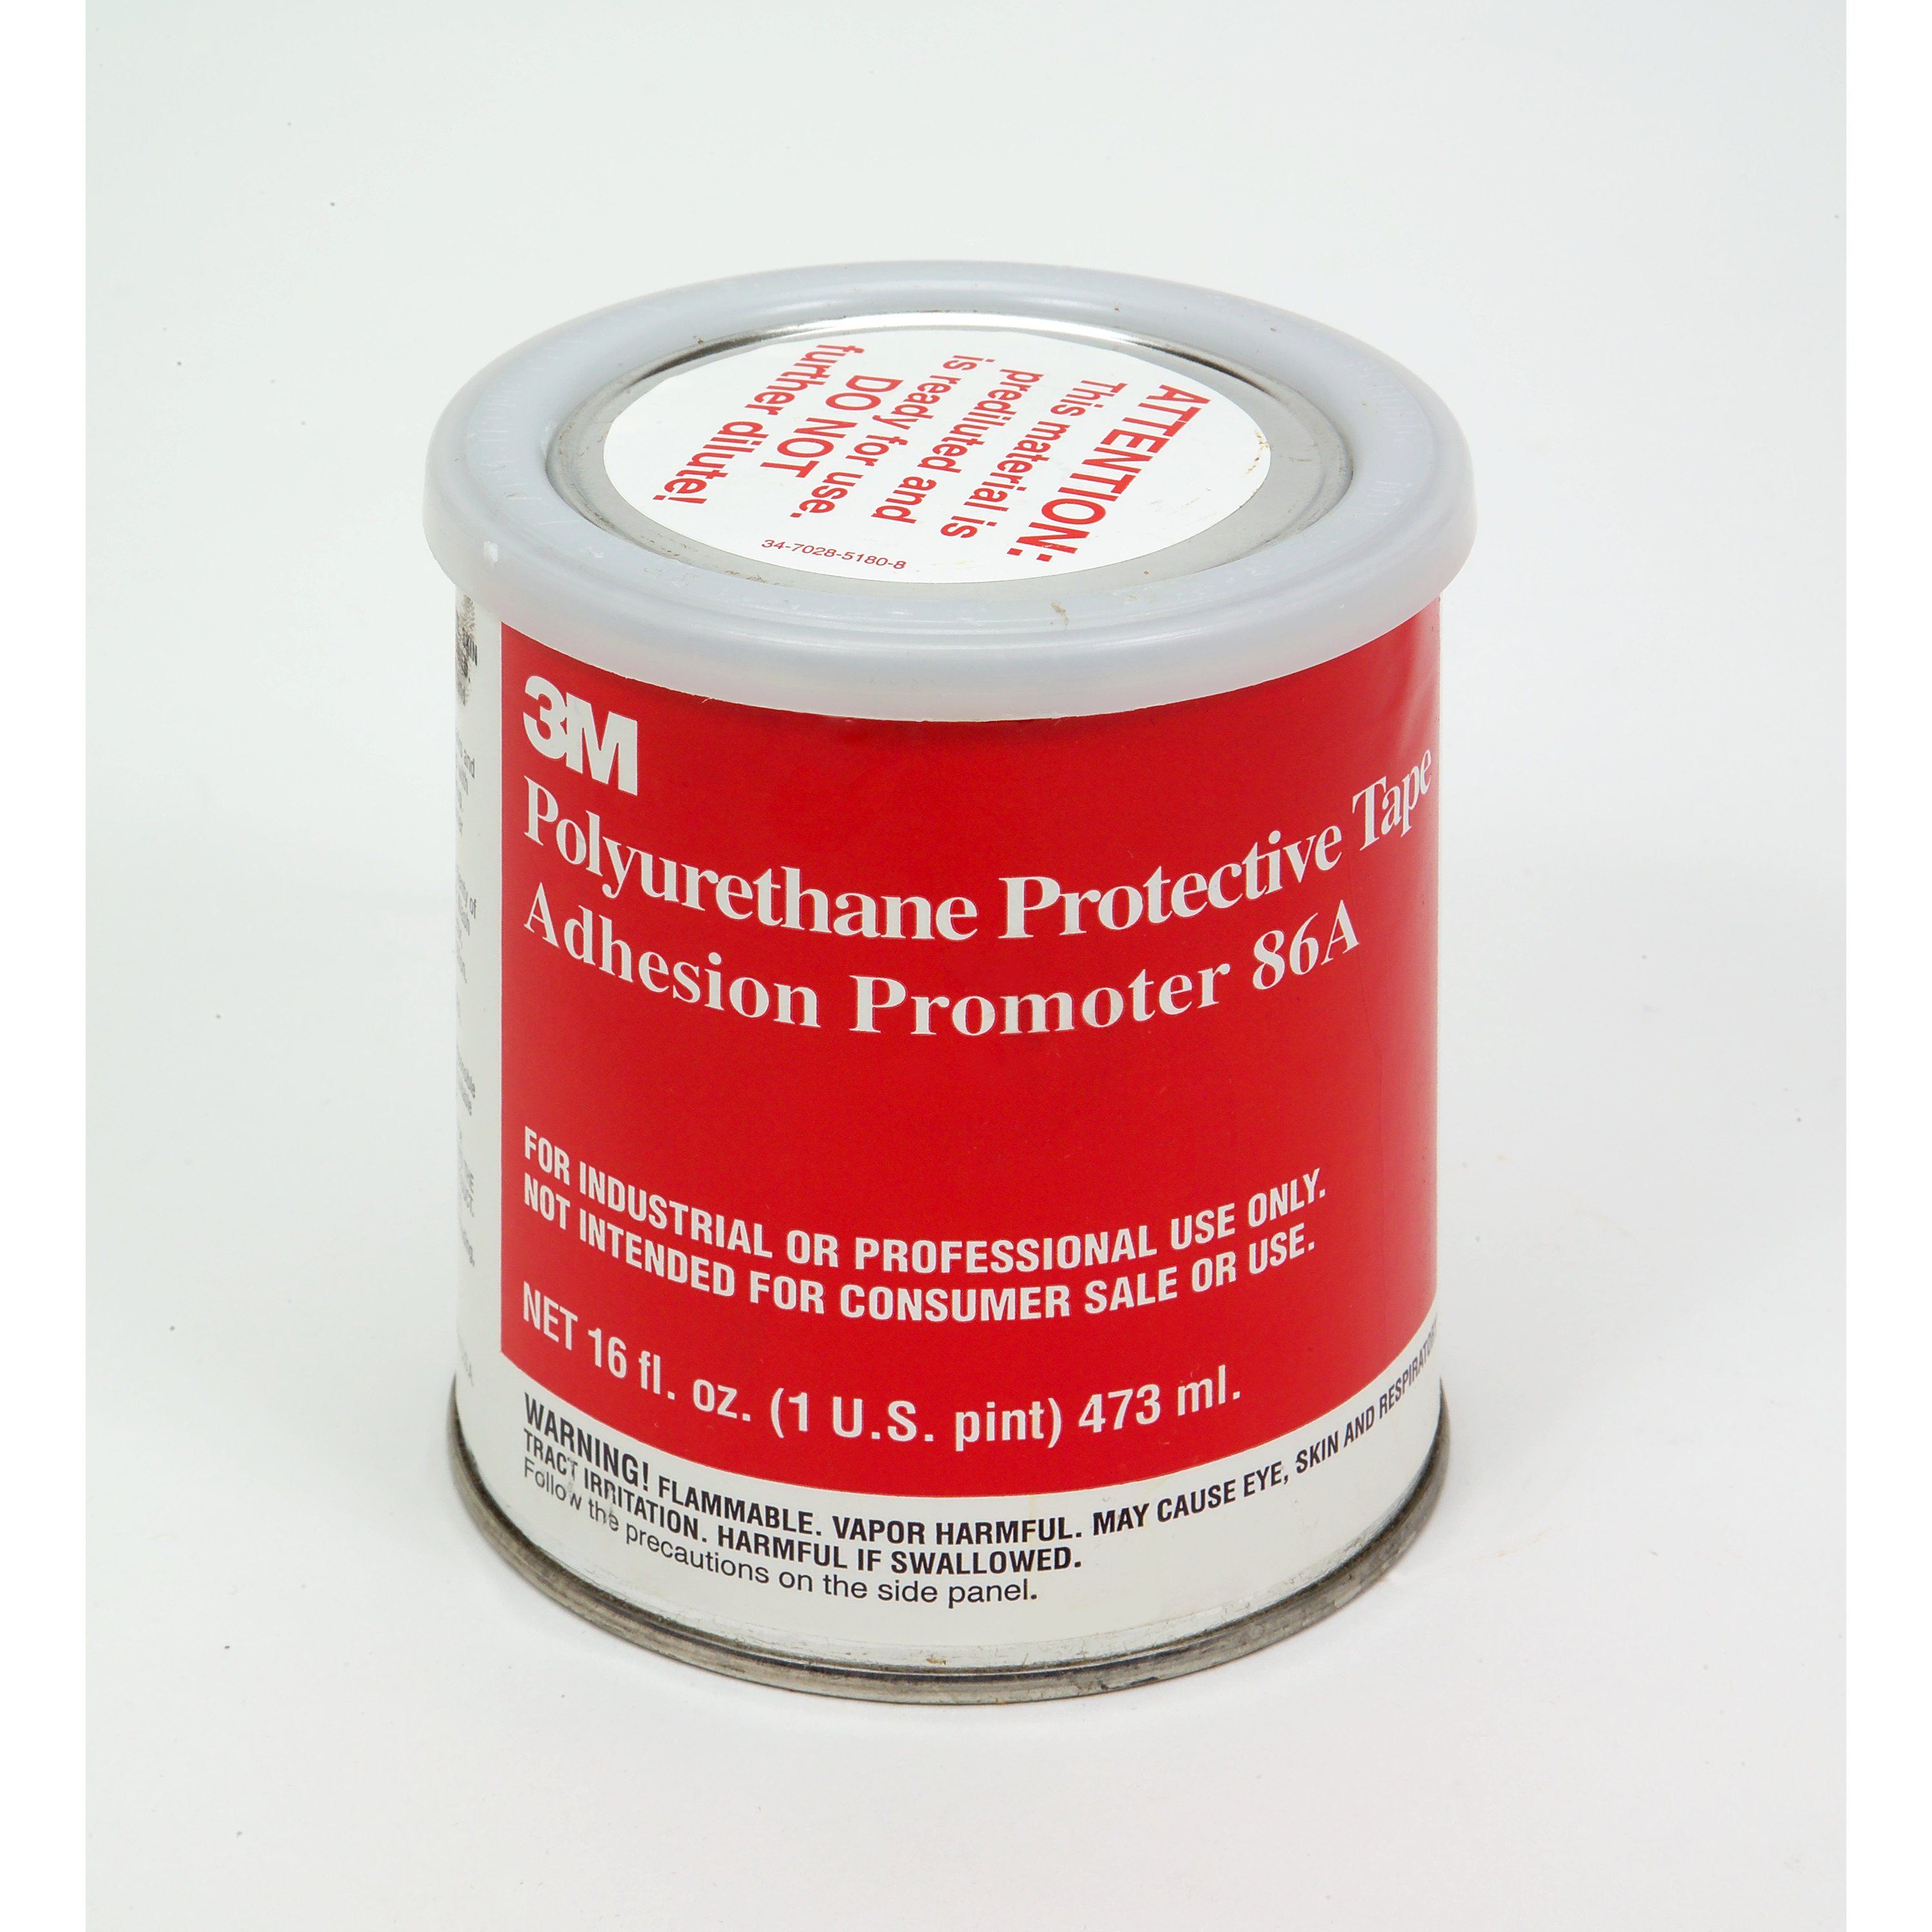 3M™ Adhesion Promoter 86A, Transparent , 1 pt, 12 Can/Case